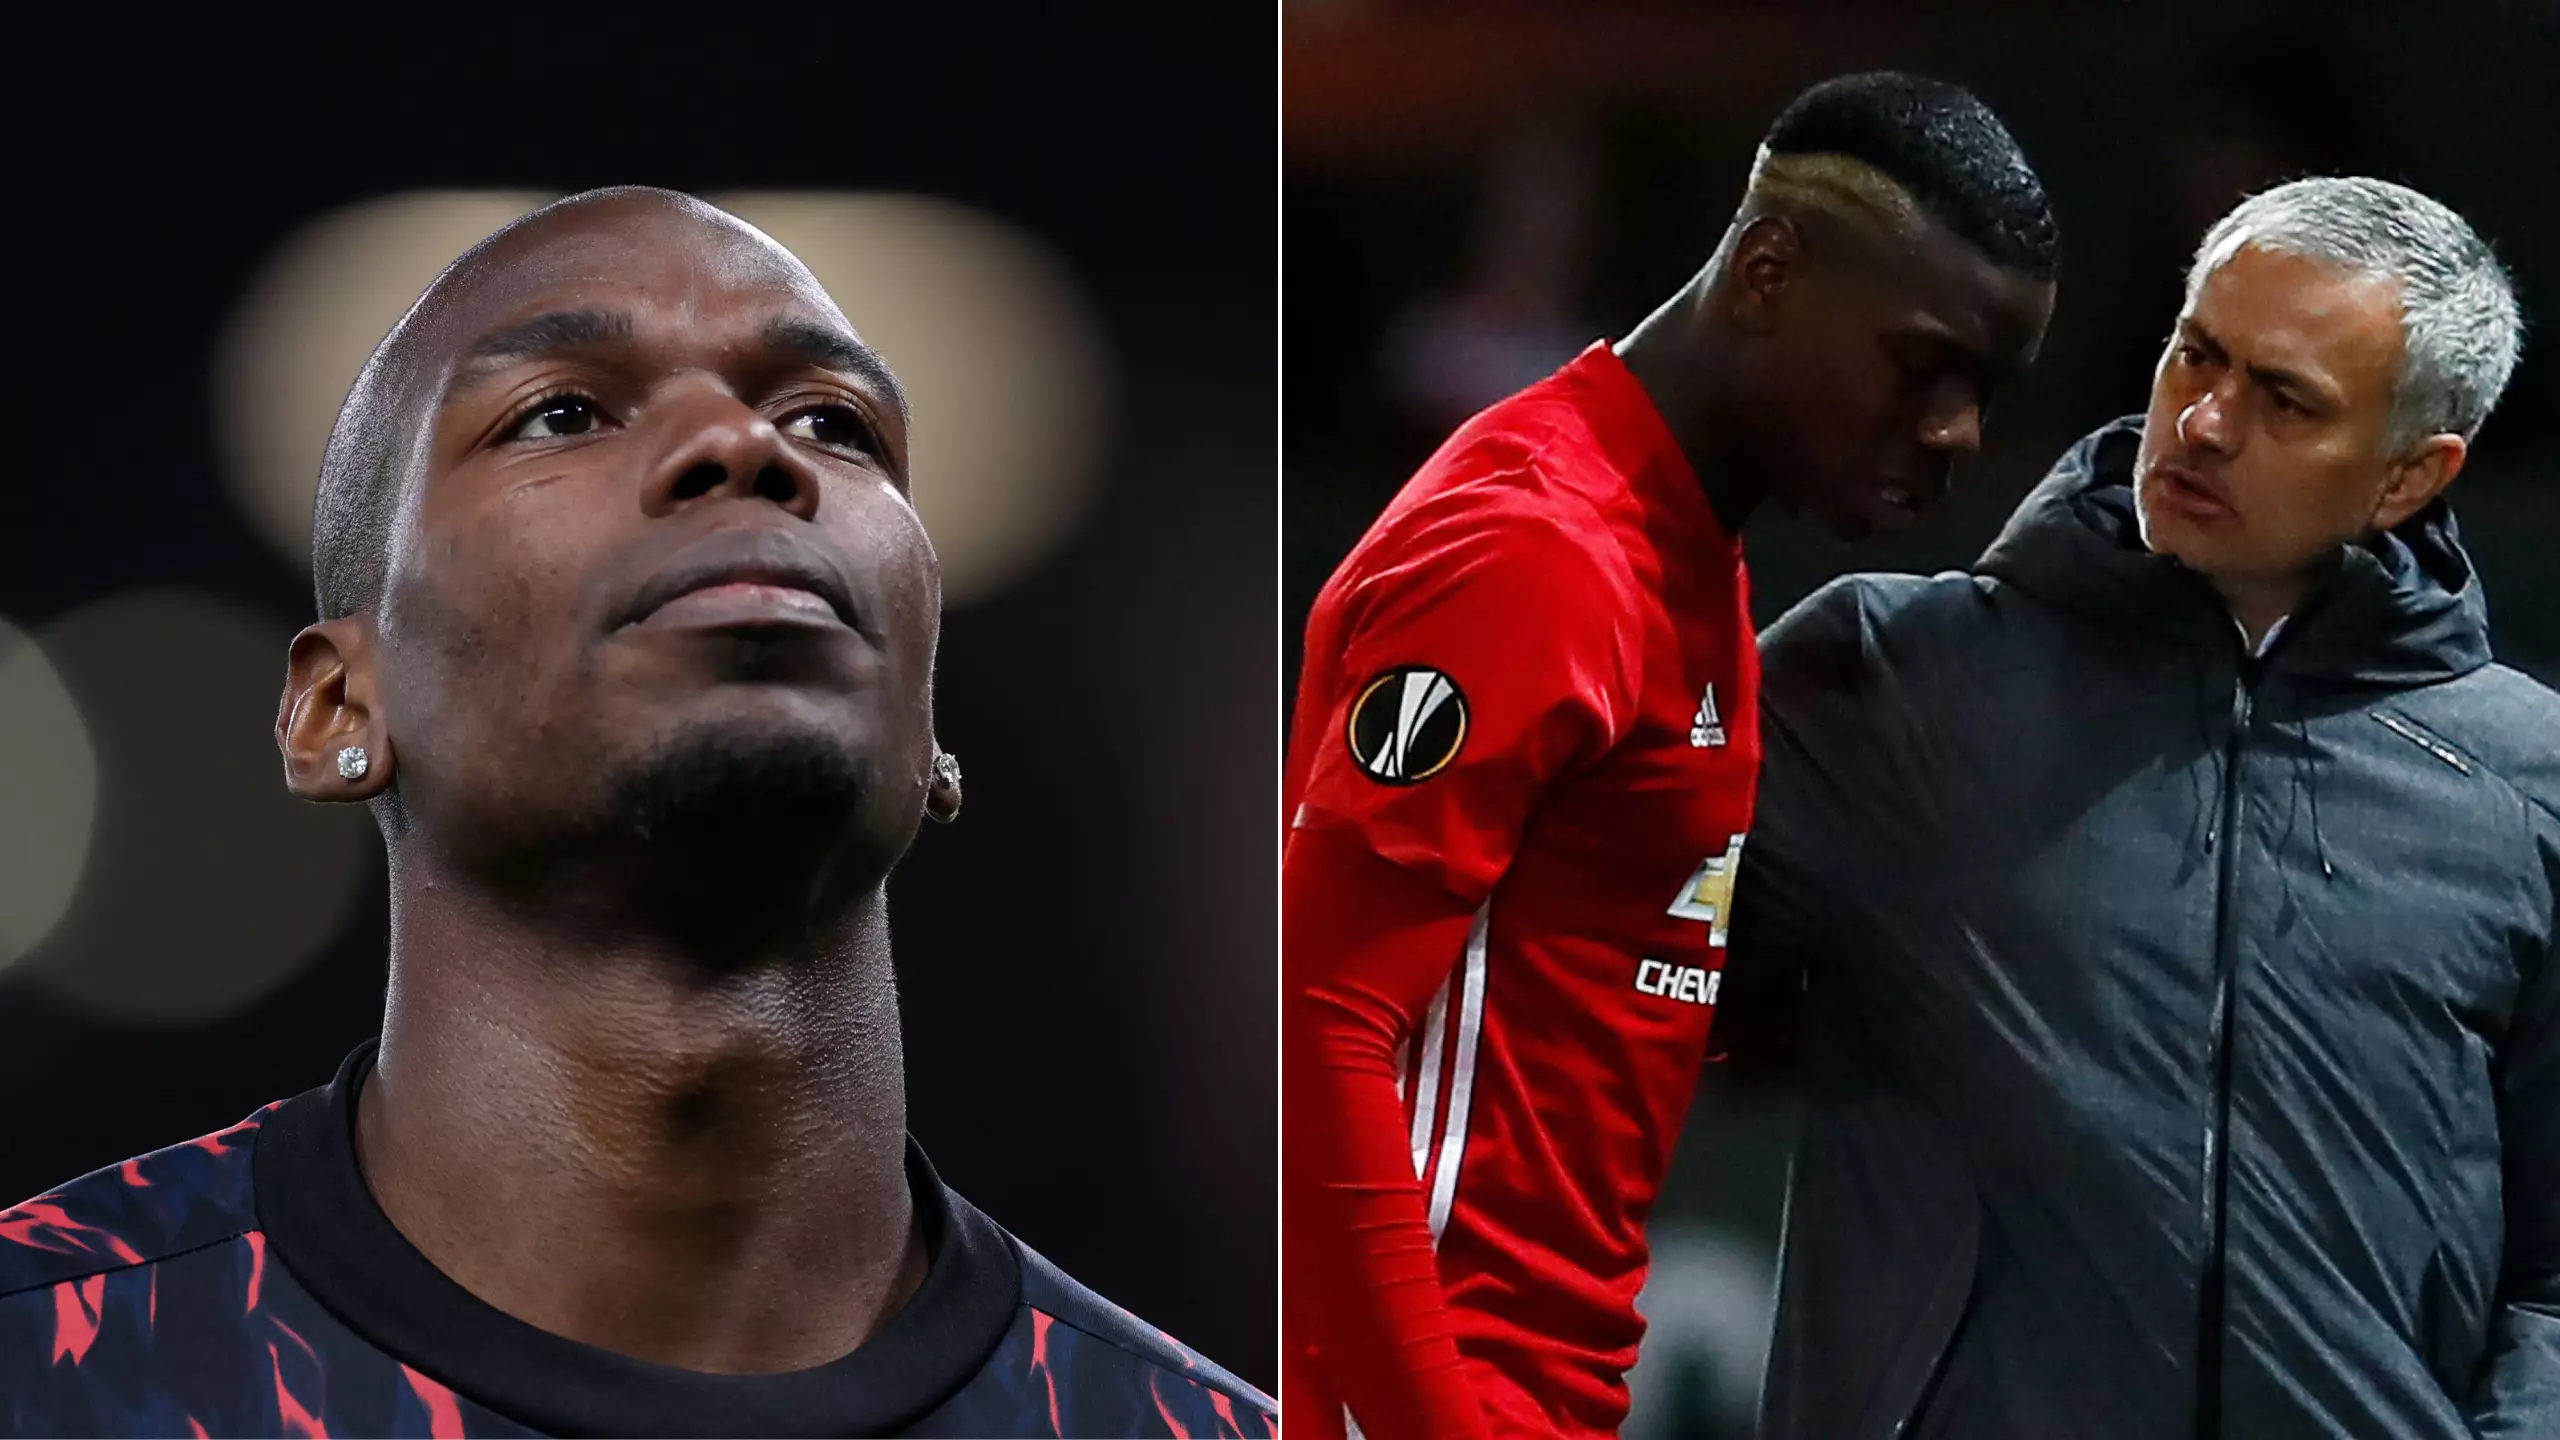 Paul Pogba Opens Up On Suffering From Depression